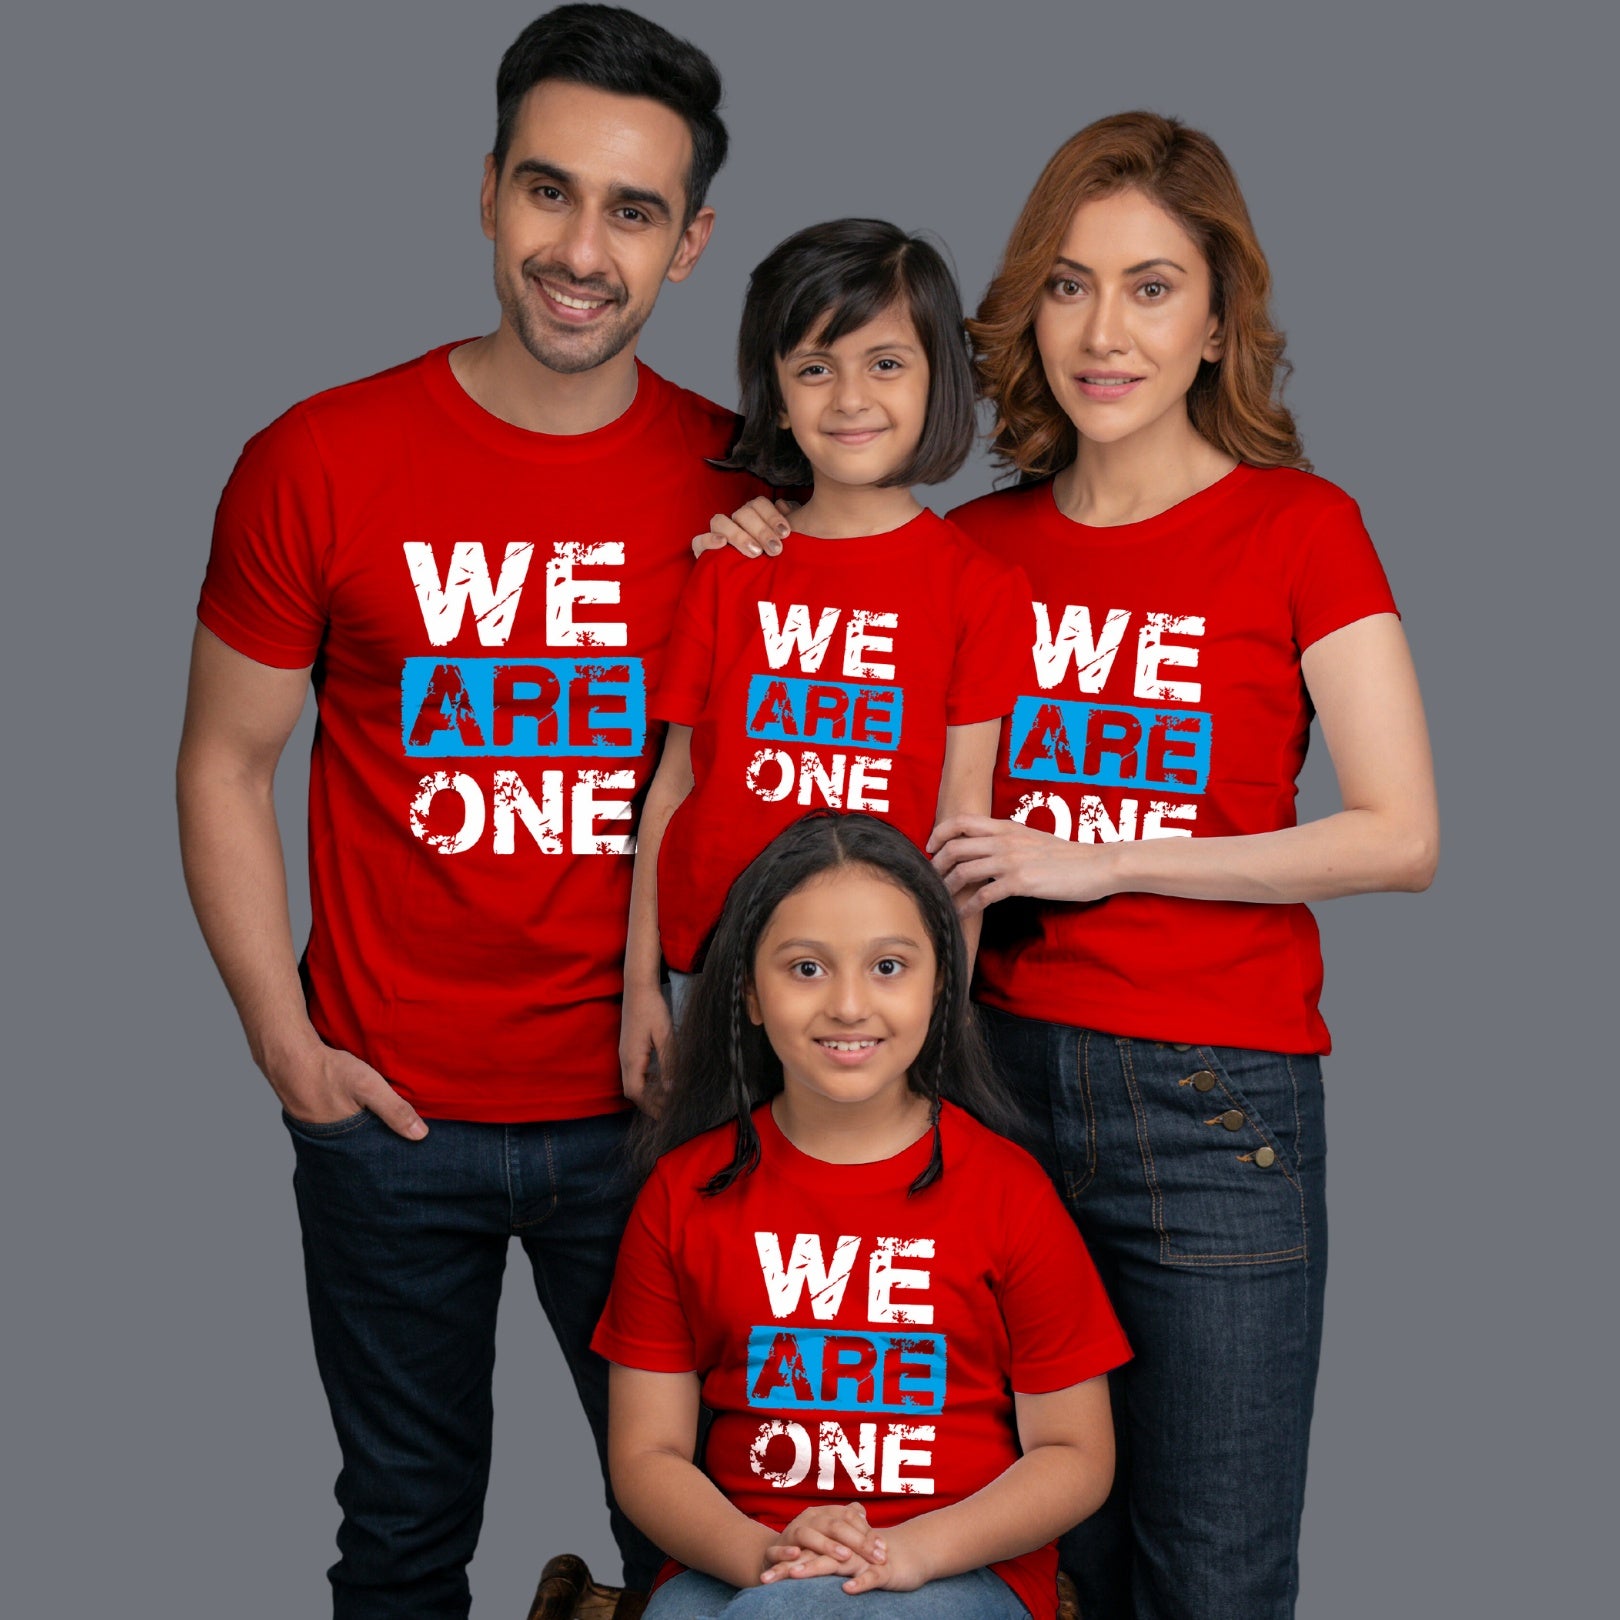 Family t shirts set of 4 Mom Dad Two Daughters in Red Colour - We Are One Variant